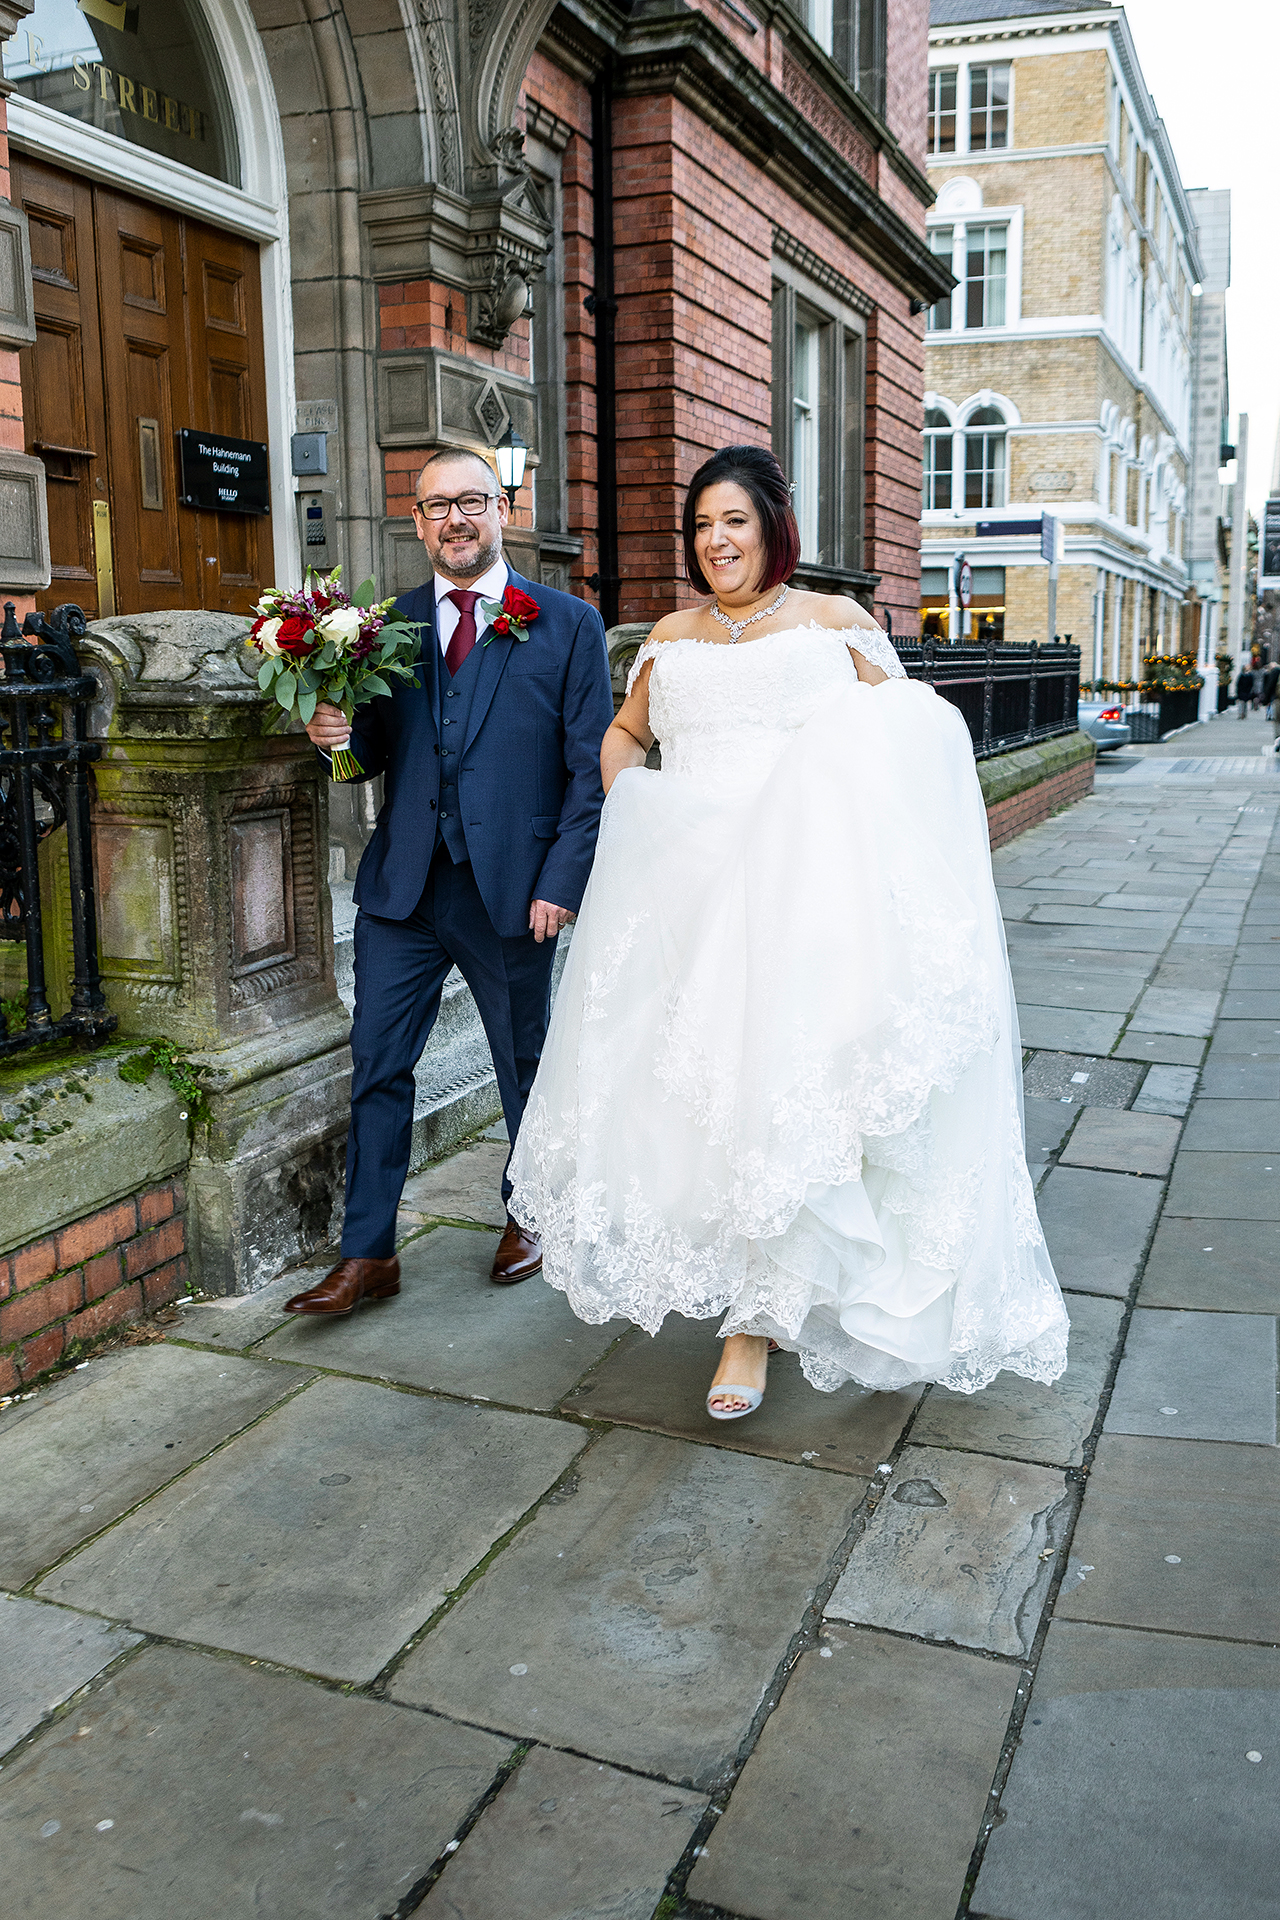 Photography of the bride and groom outside the Hope street hotel liverpool 